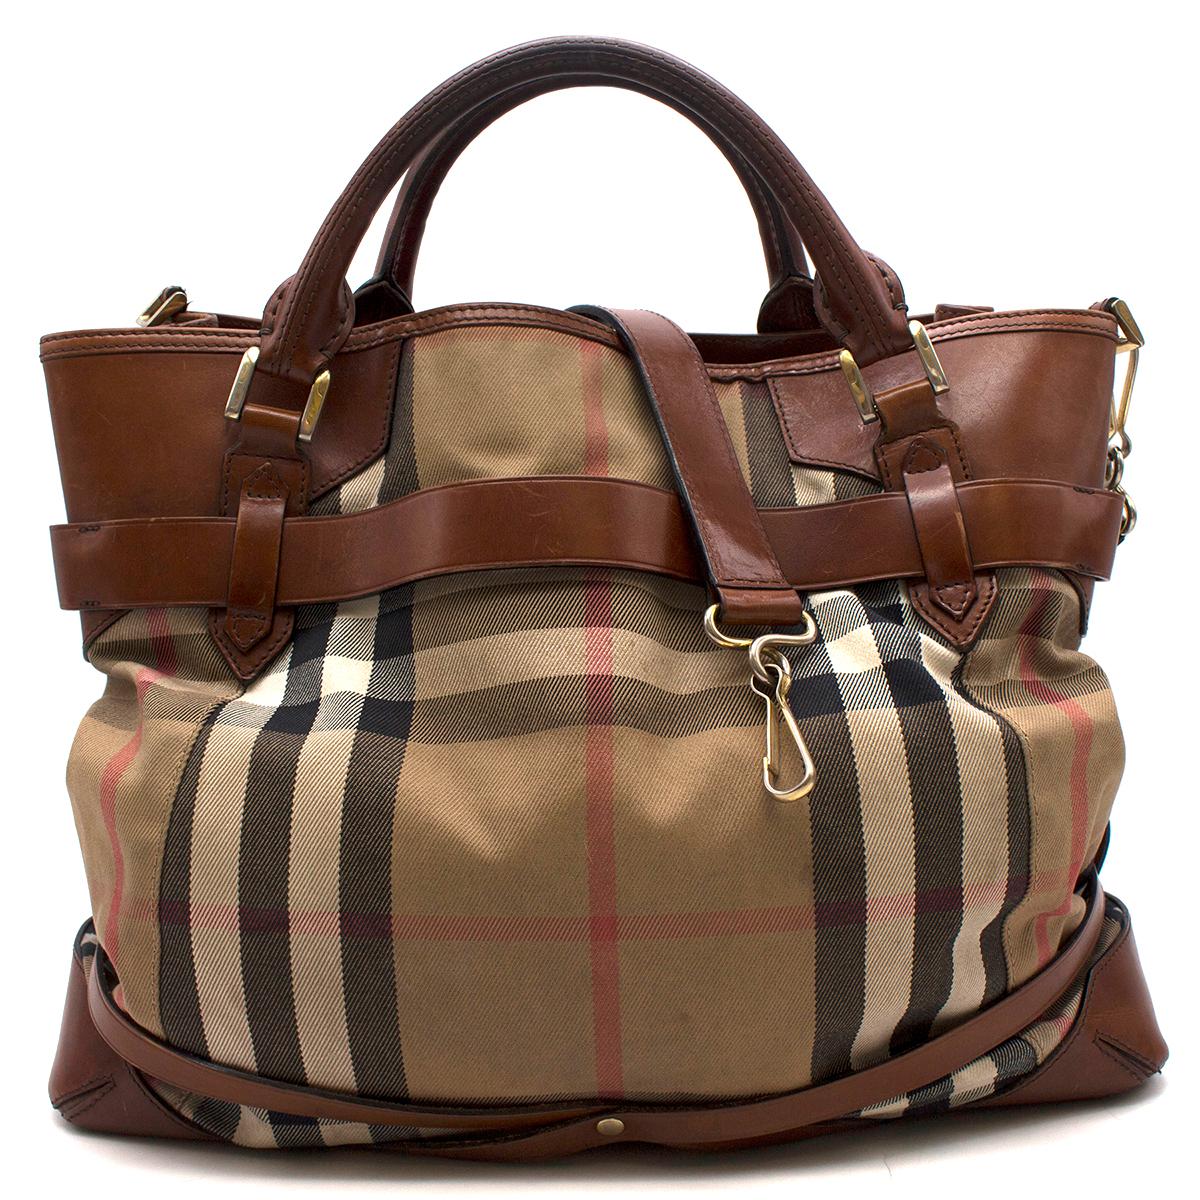 Burberry Nova Check Canvas & Leather Large Tote Bag

-Brown and tan plaid
-Leather and canvas
-Decorative buckle detailing 
-Top handles
-Removable shoulder strap
-Gold hardware 
-Two main open compartments
-One center zip compartment 
-Small zip